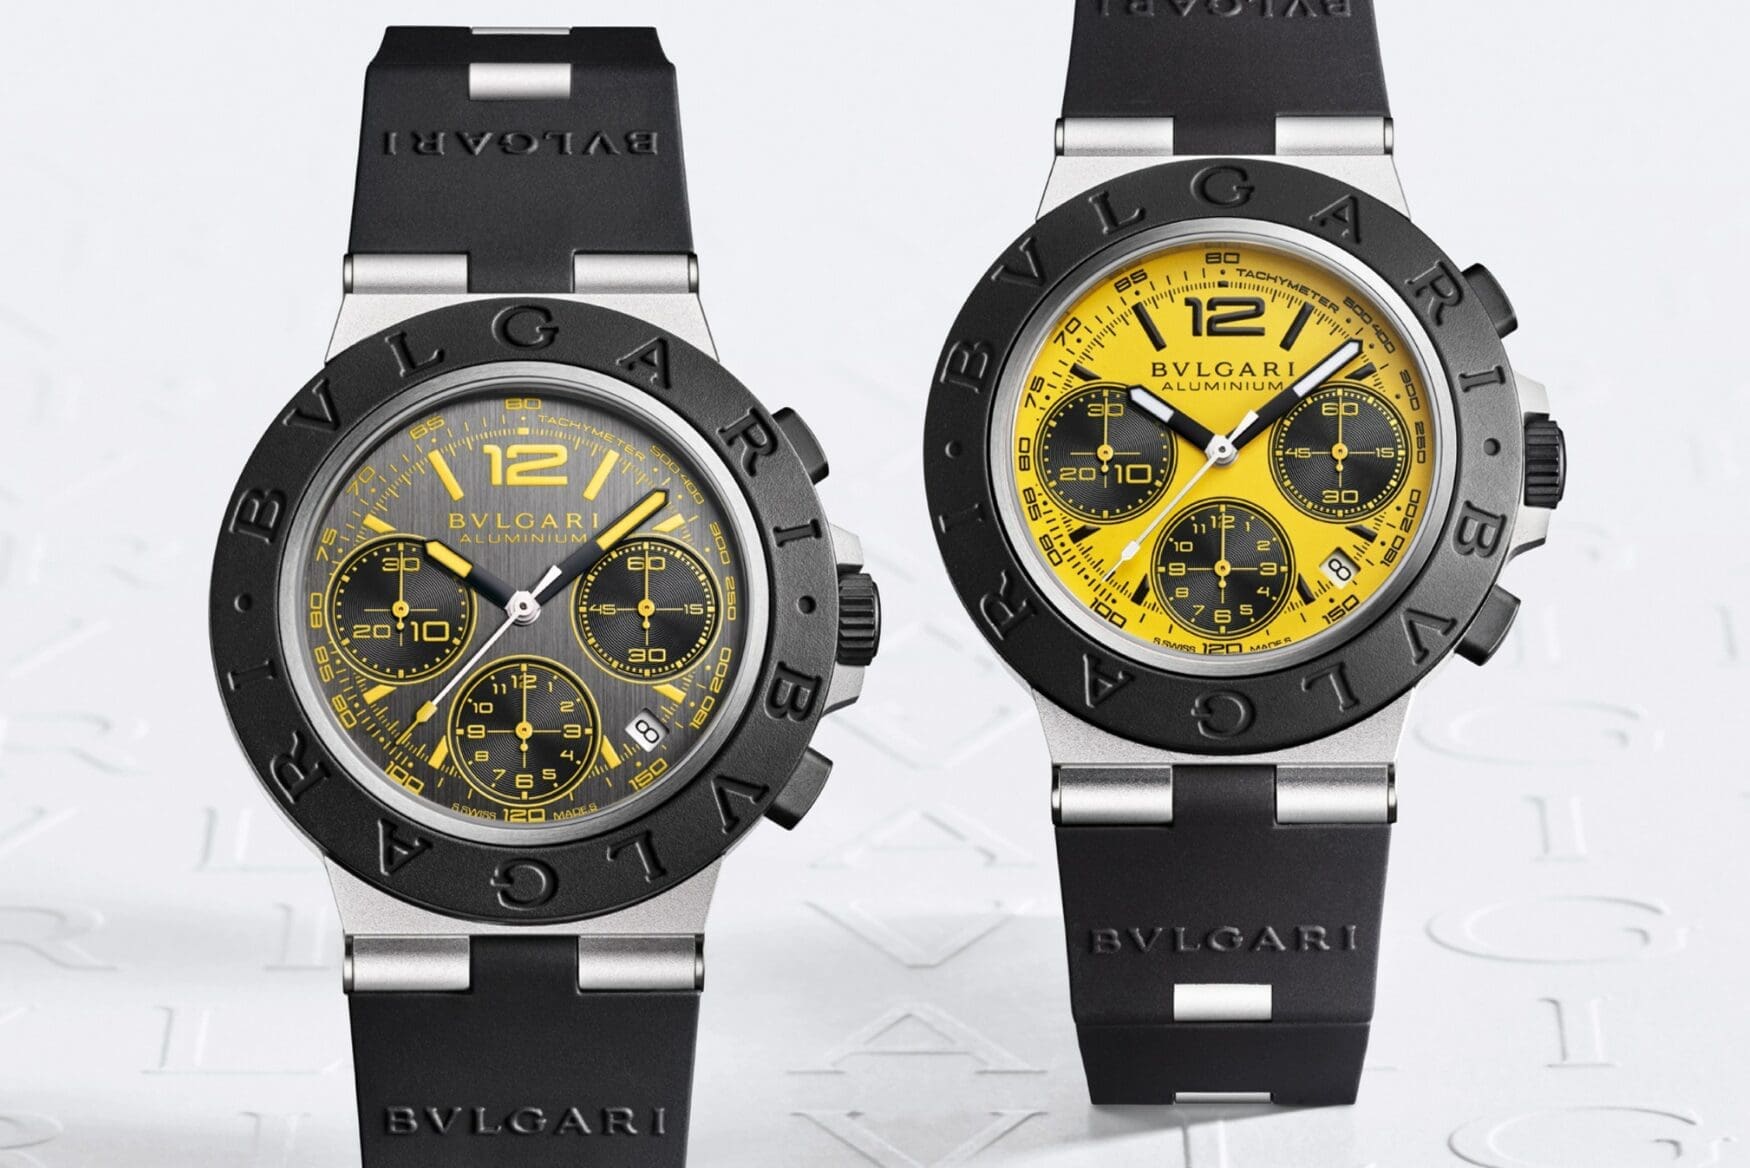 Bulgari looks to PlayStation racers with the new Aluminium Chronograph Gran Turismo limited edition